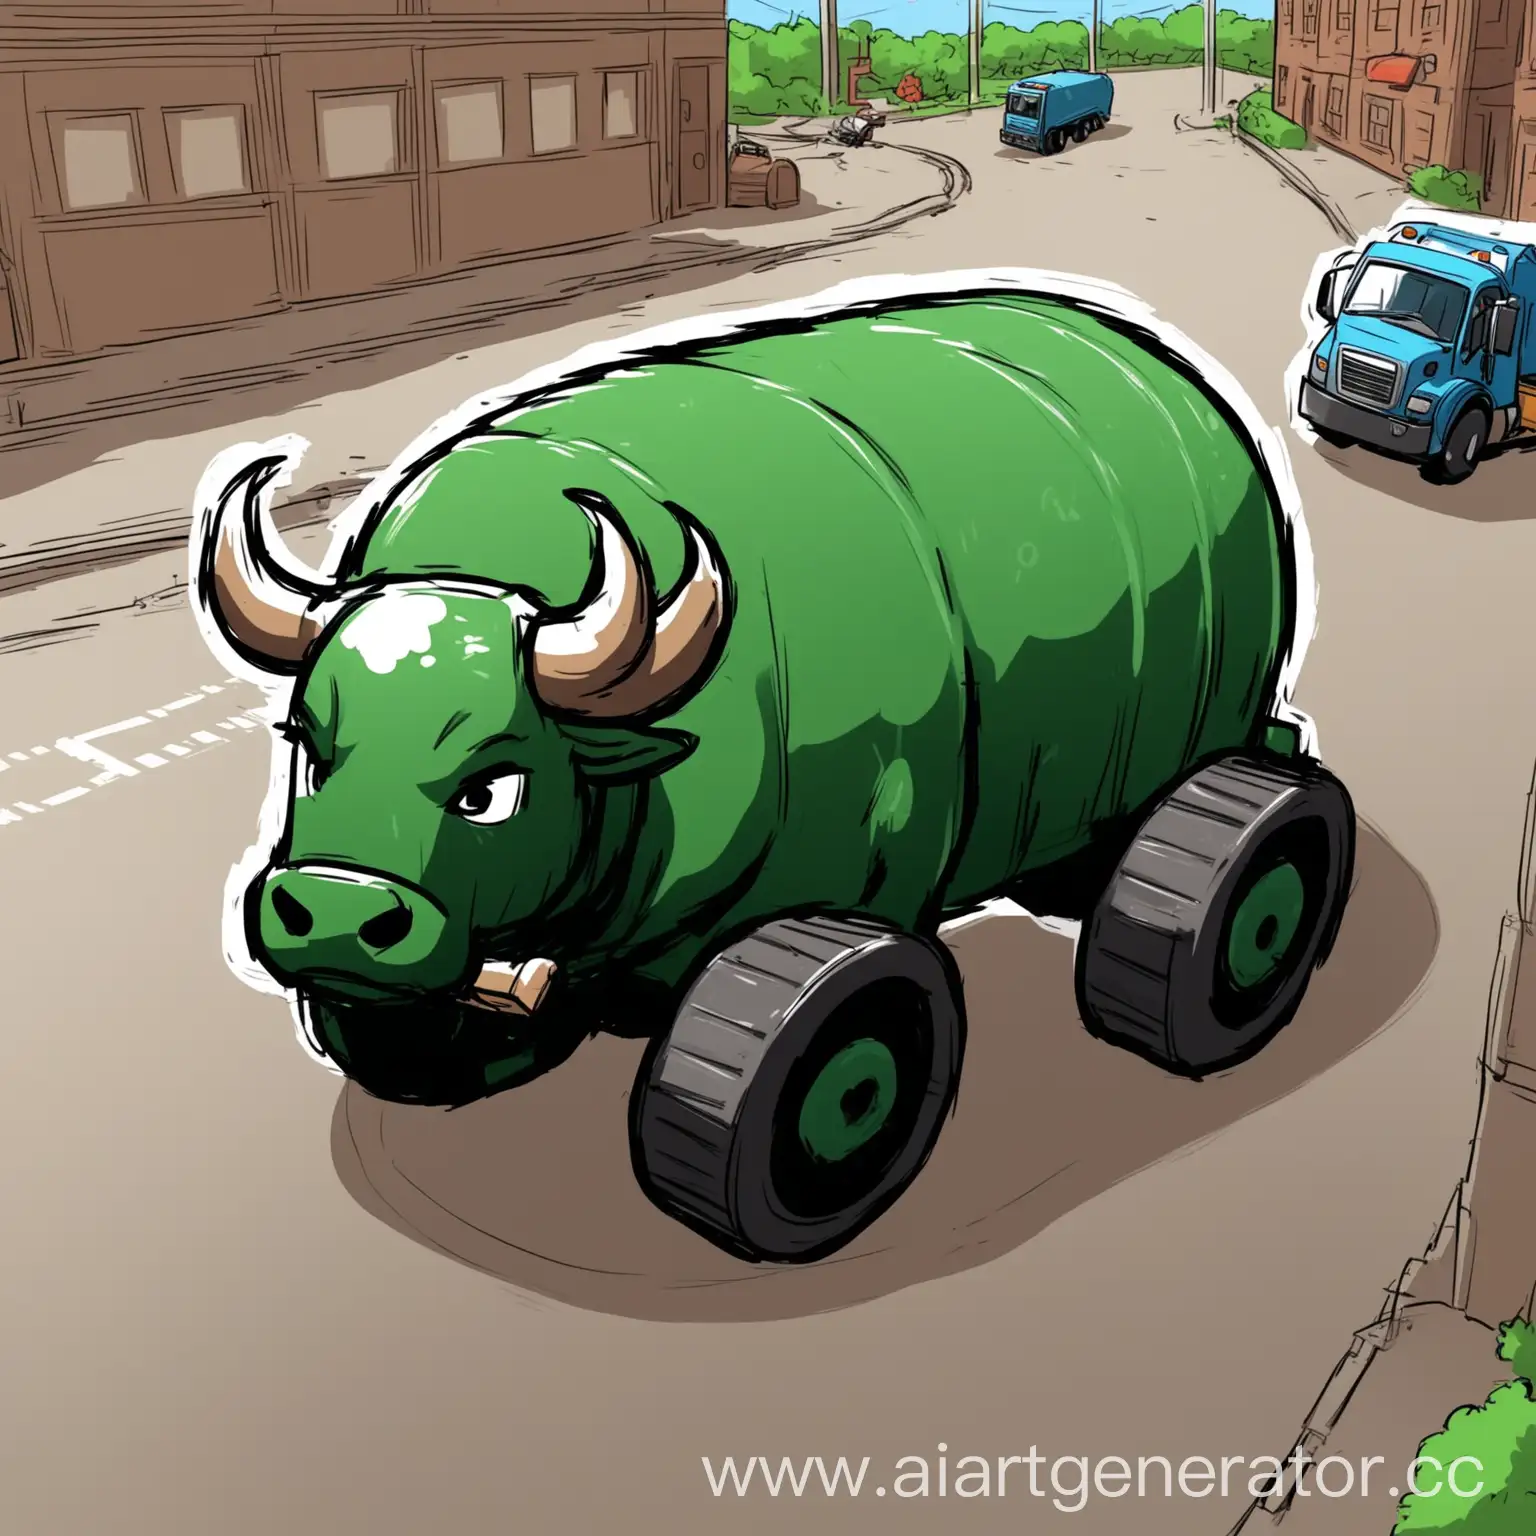 draw like in a cartoon
That the head of the sewer truck is made in the shape of a bull